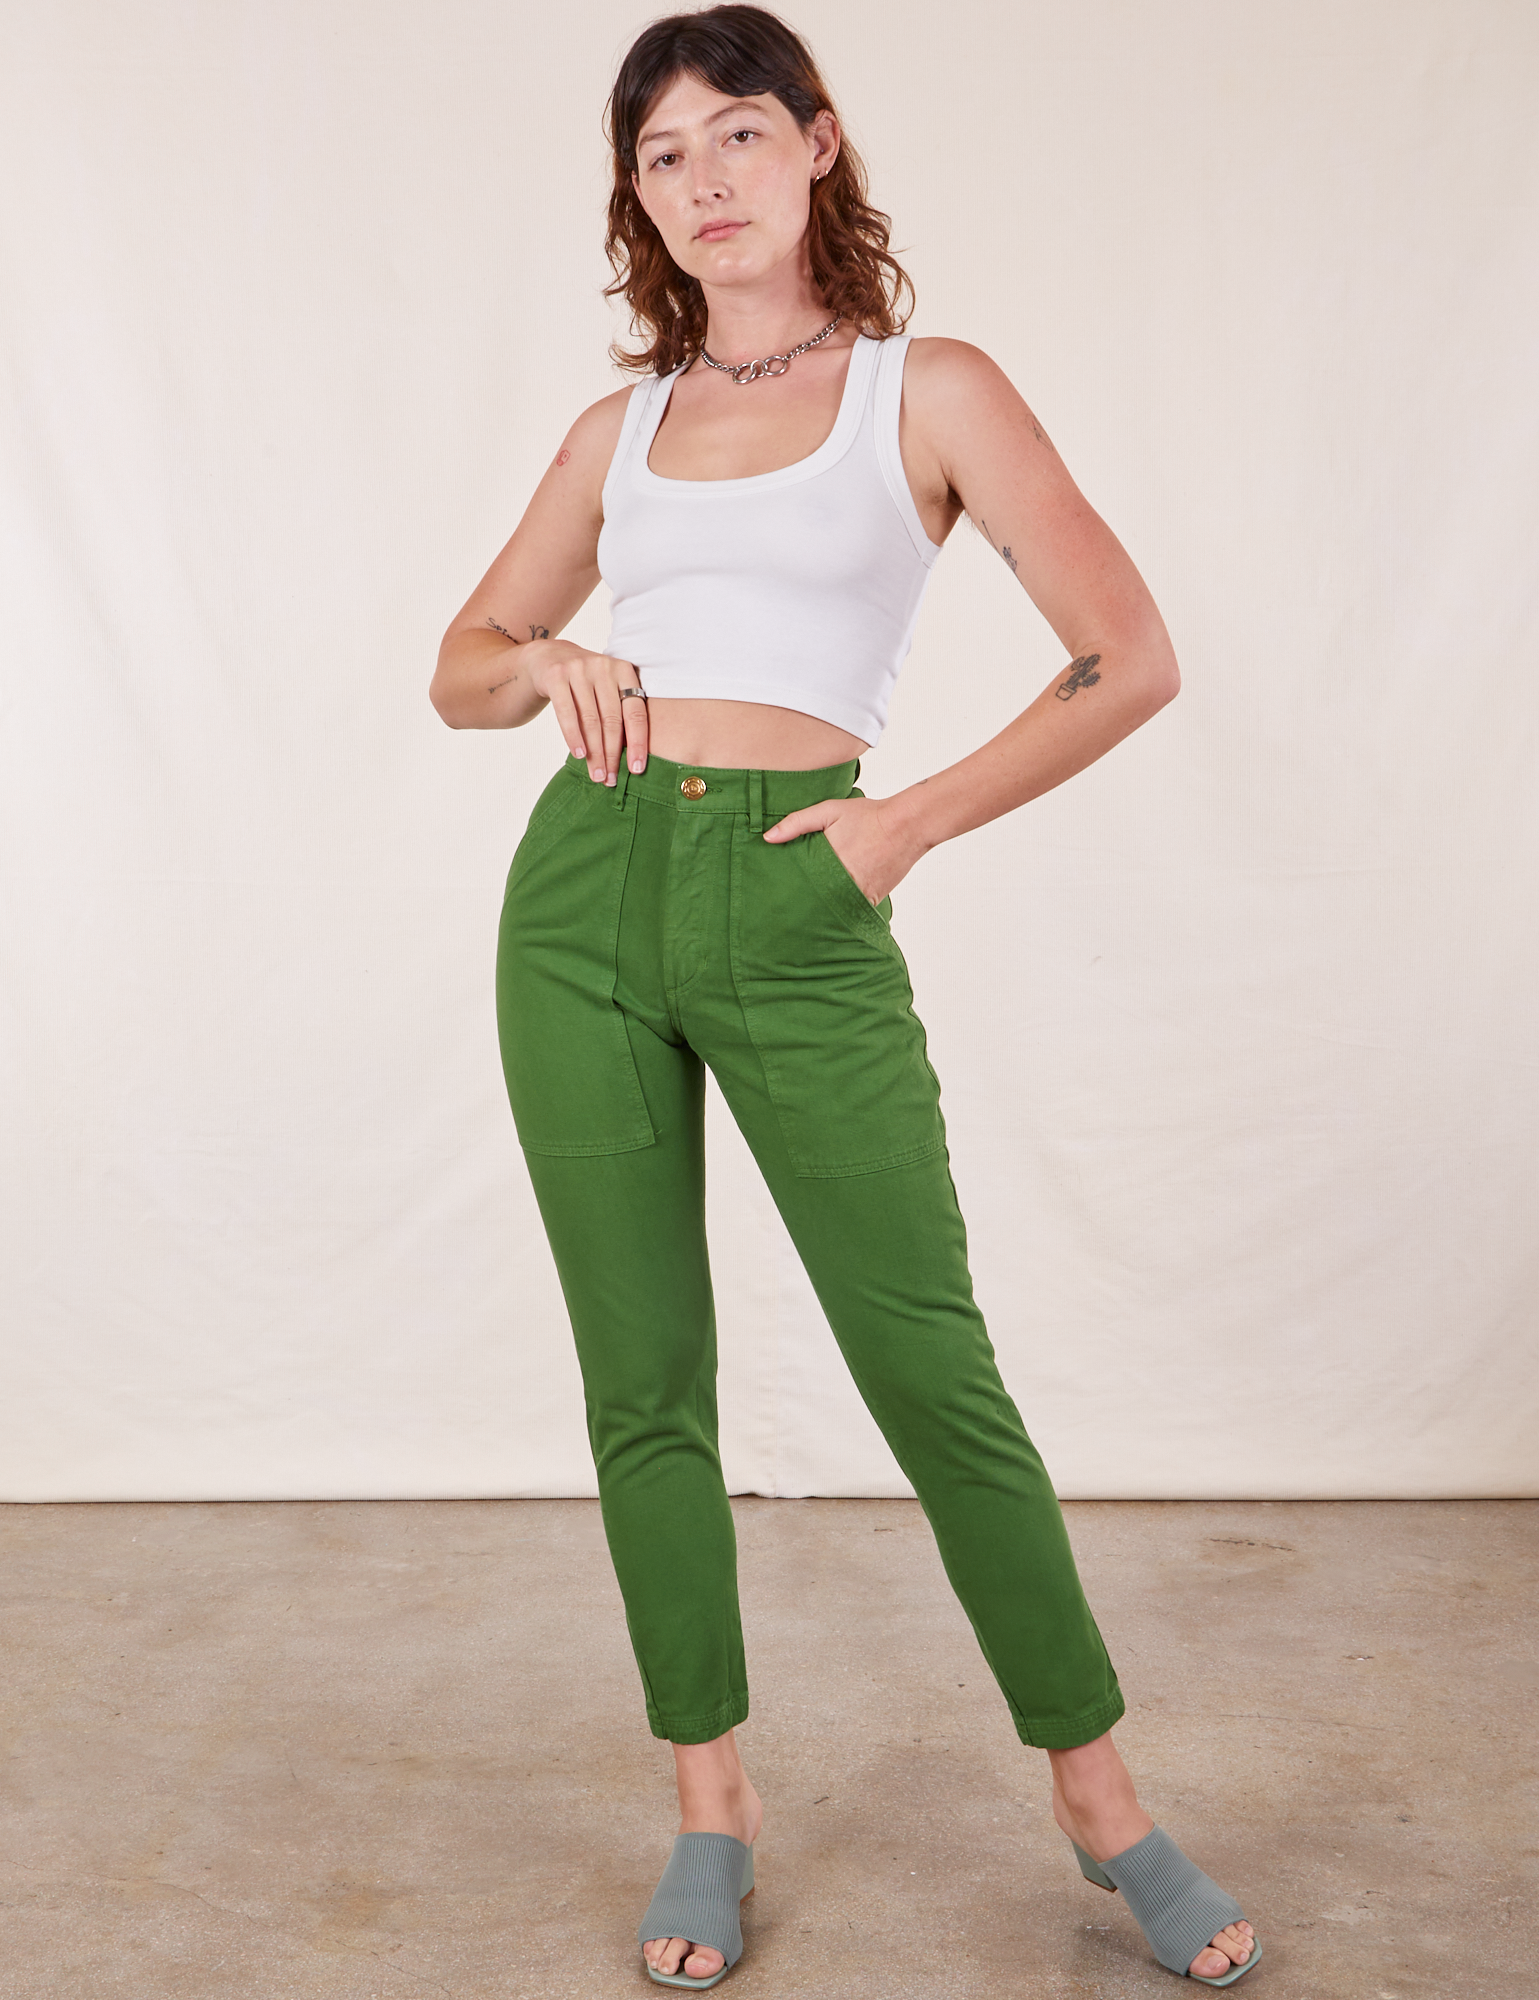 Alex is 5&#39;8&quot; and wearing XXS Pencil Pants in Lawn Green paired with vintage off-white Cropped Tank Top